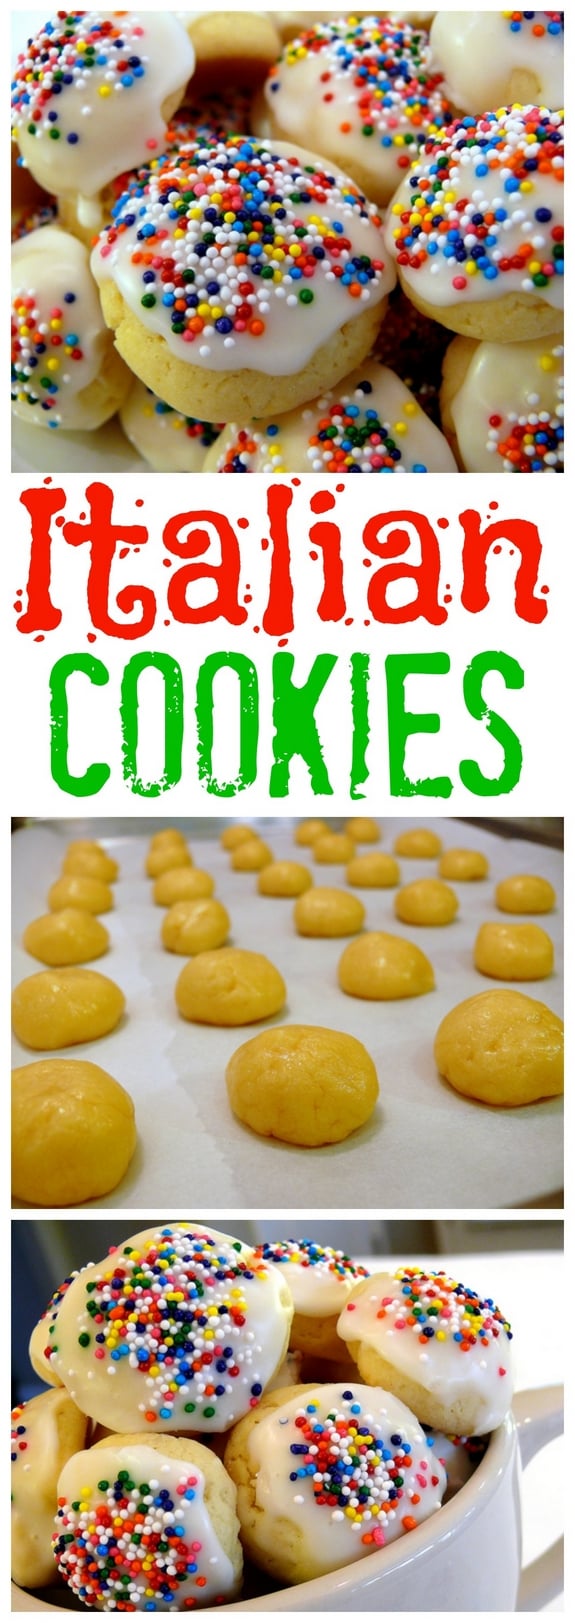 These Italian Cookies are the perfect bites of sweetness and are the perfect choice for any cookie platter, holiday or otherwise.  #noblepig #Italian #italiancookies #italiandessert #cookies